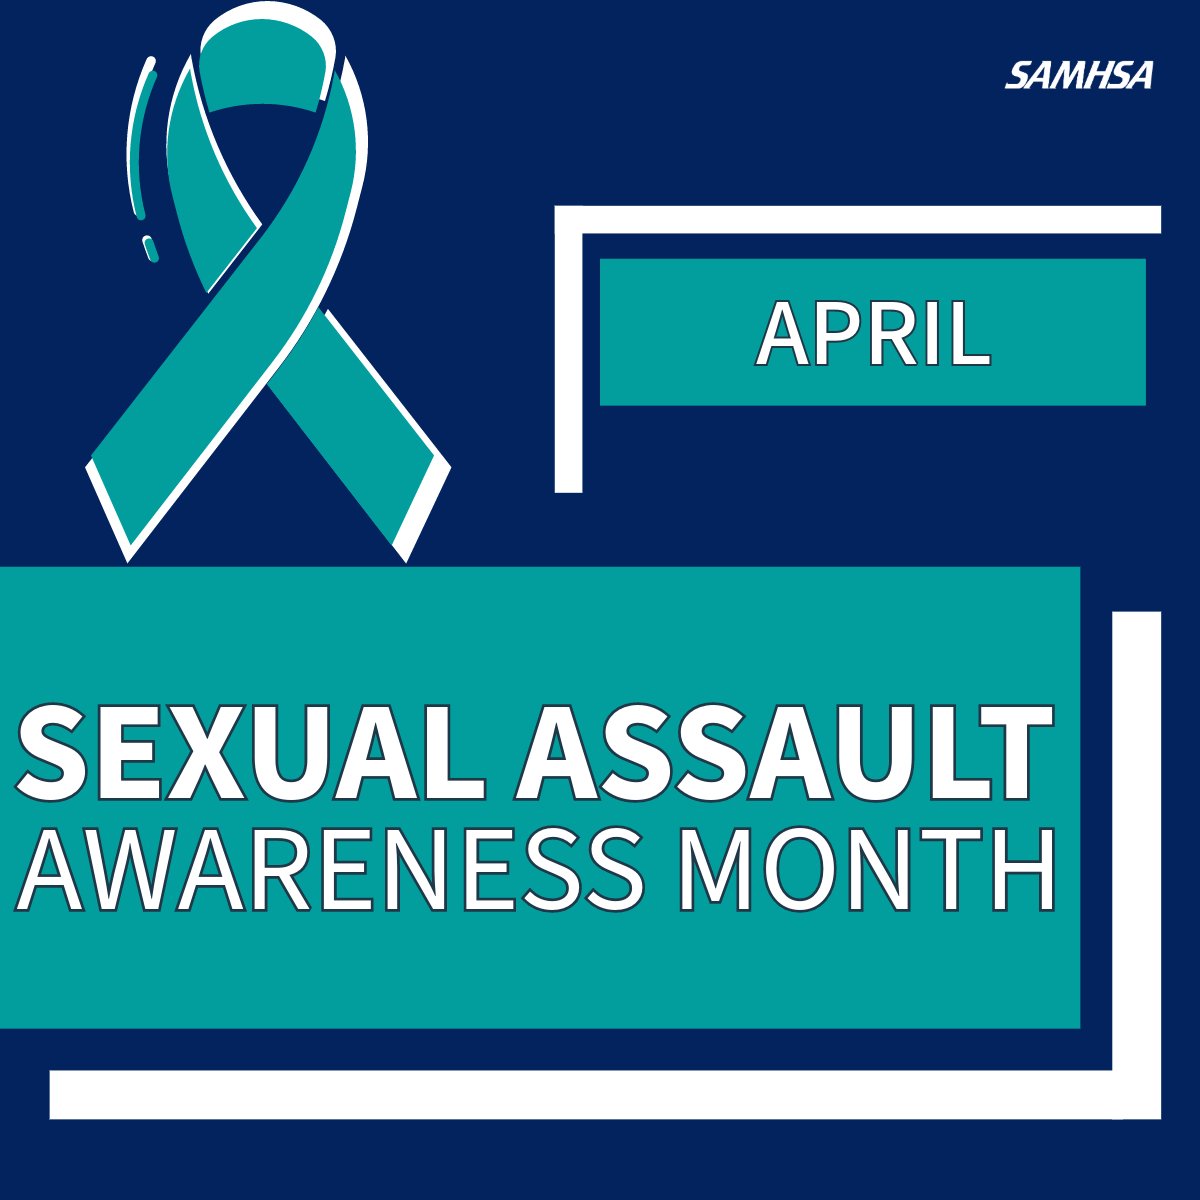 Sexual violence can affect individuals of all ages and backgrounds and can significantly impact a survivor’s physical and psychological wellbeing in the short and long term. Resources to support these survivors and their families can be found at: samhsa.gov/child-trauma/a…